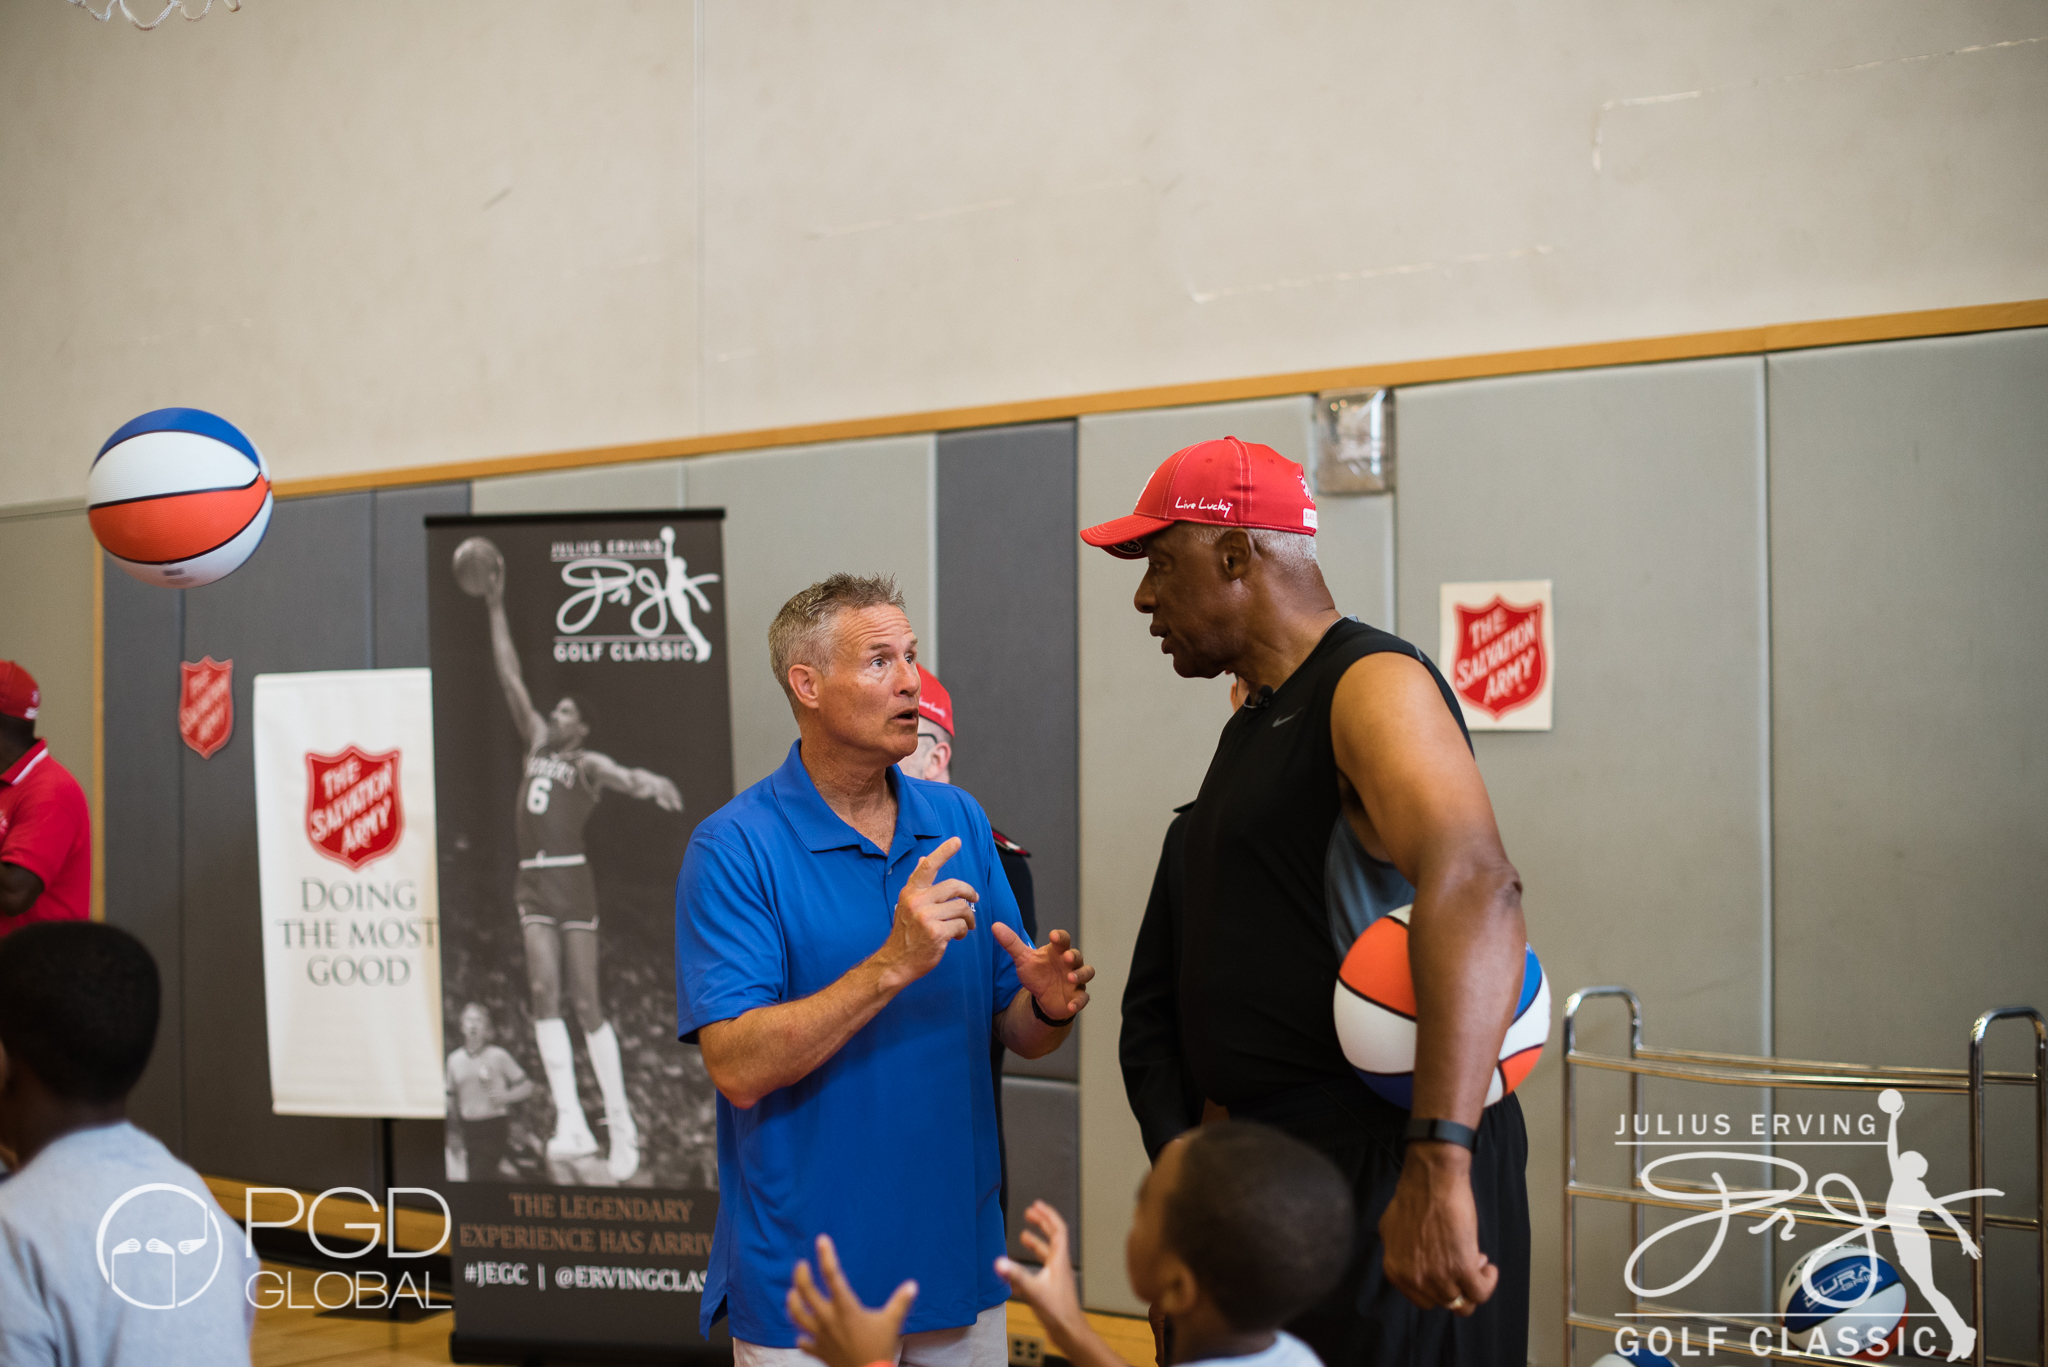 76ers Head Coach Brett Brown and Julius Erving preparing for the Erving Youth Clinic at The Salvation Army Kroc Center.